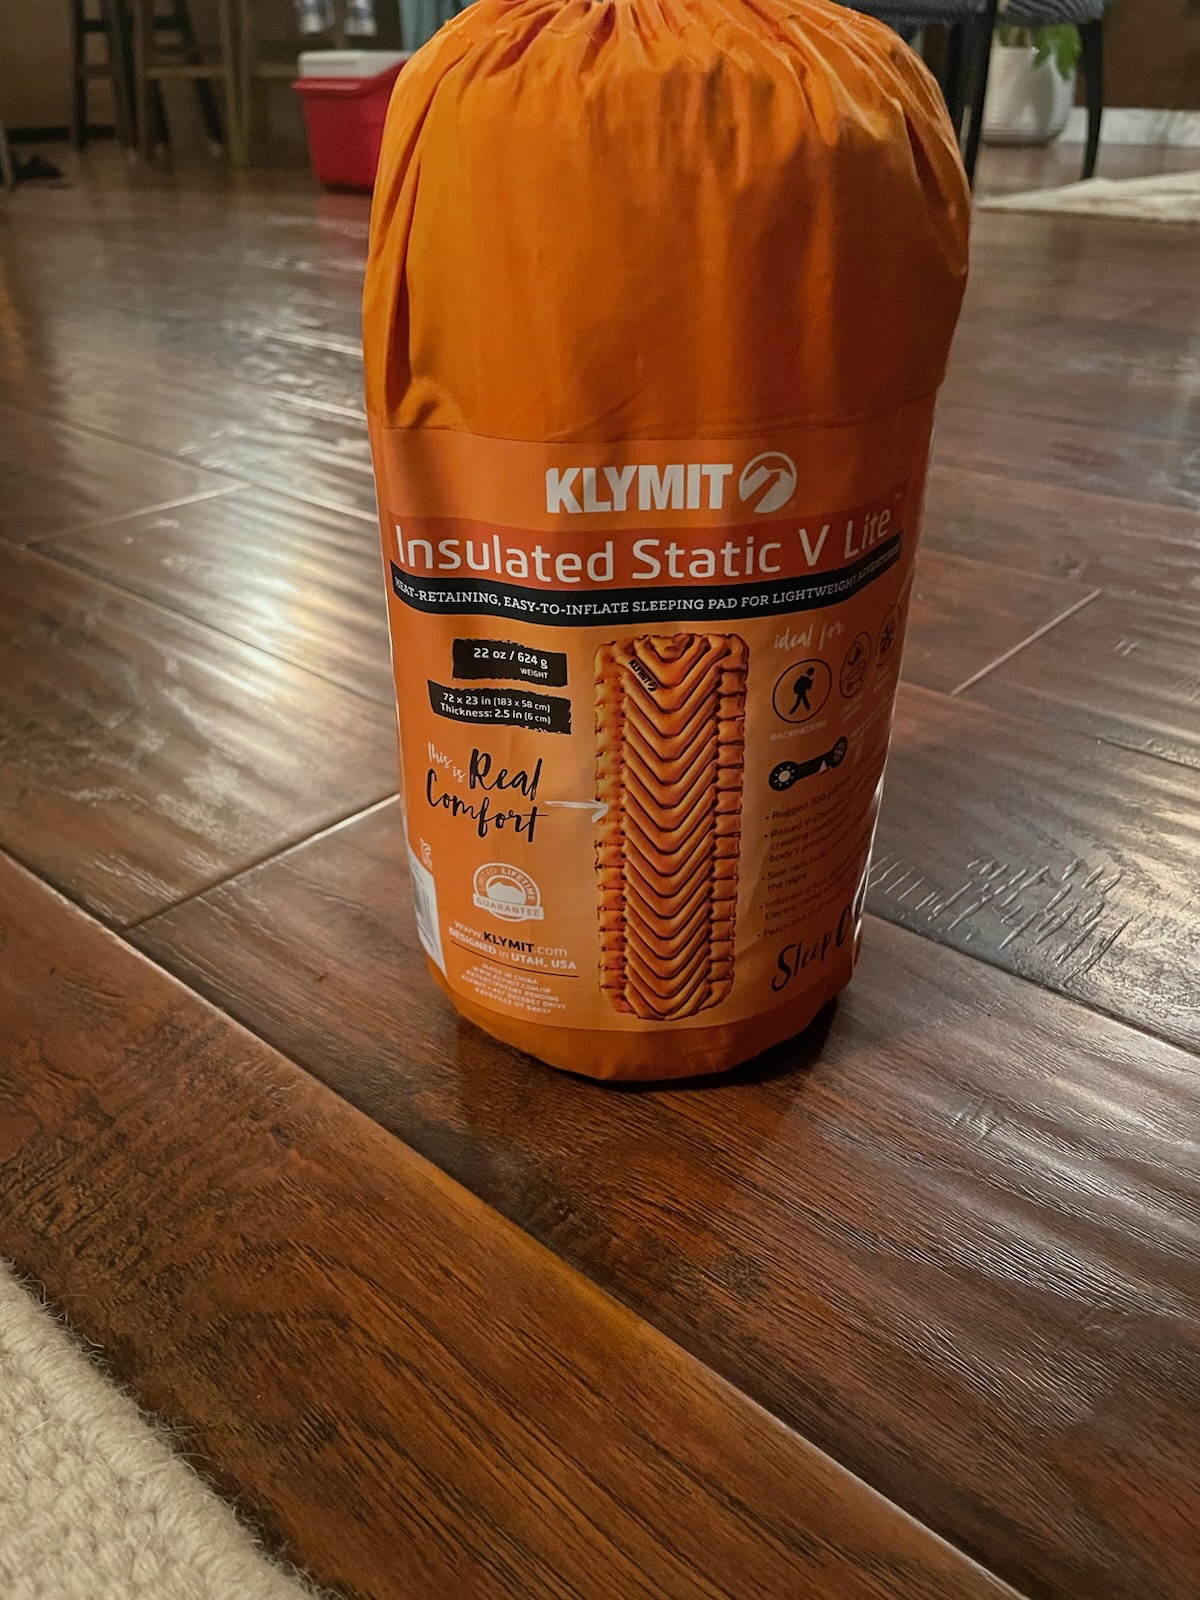 Klymit Insulated Static V Lite Sleeping Pad Review